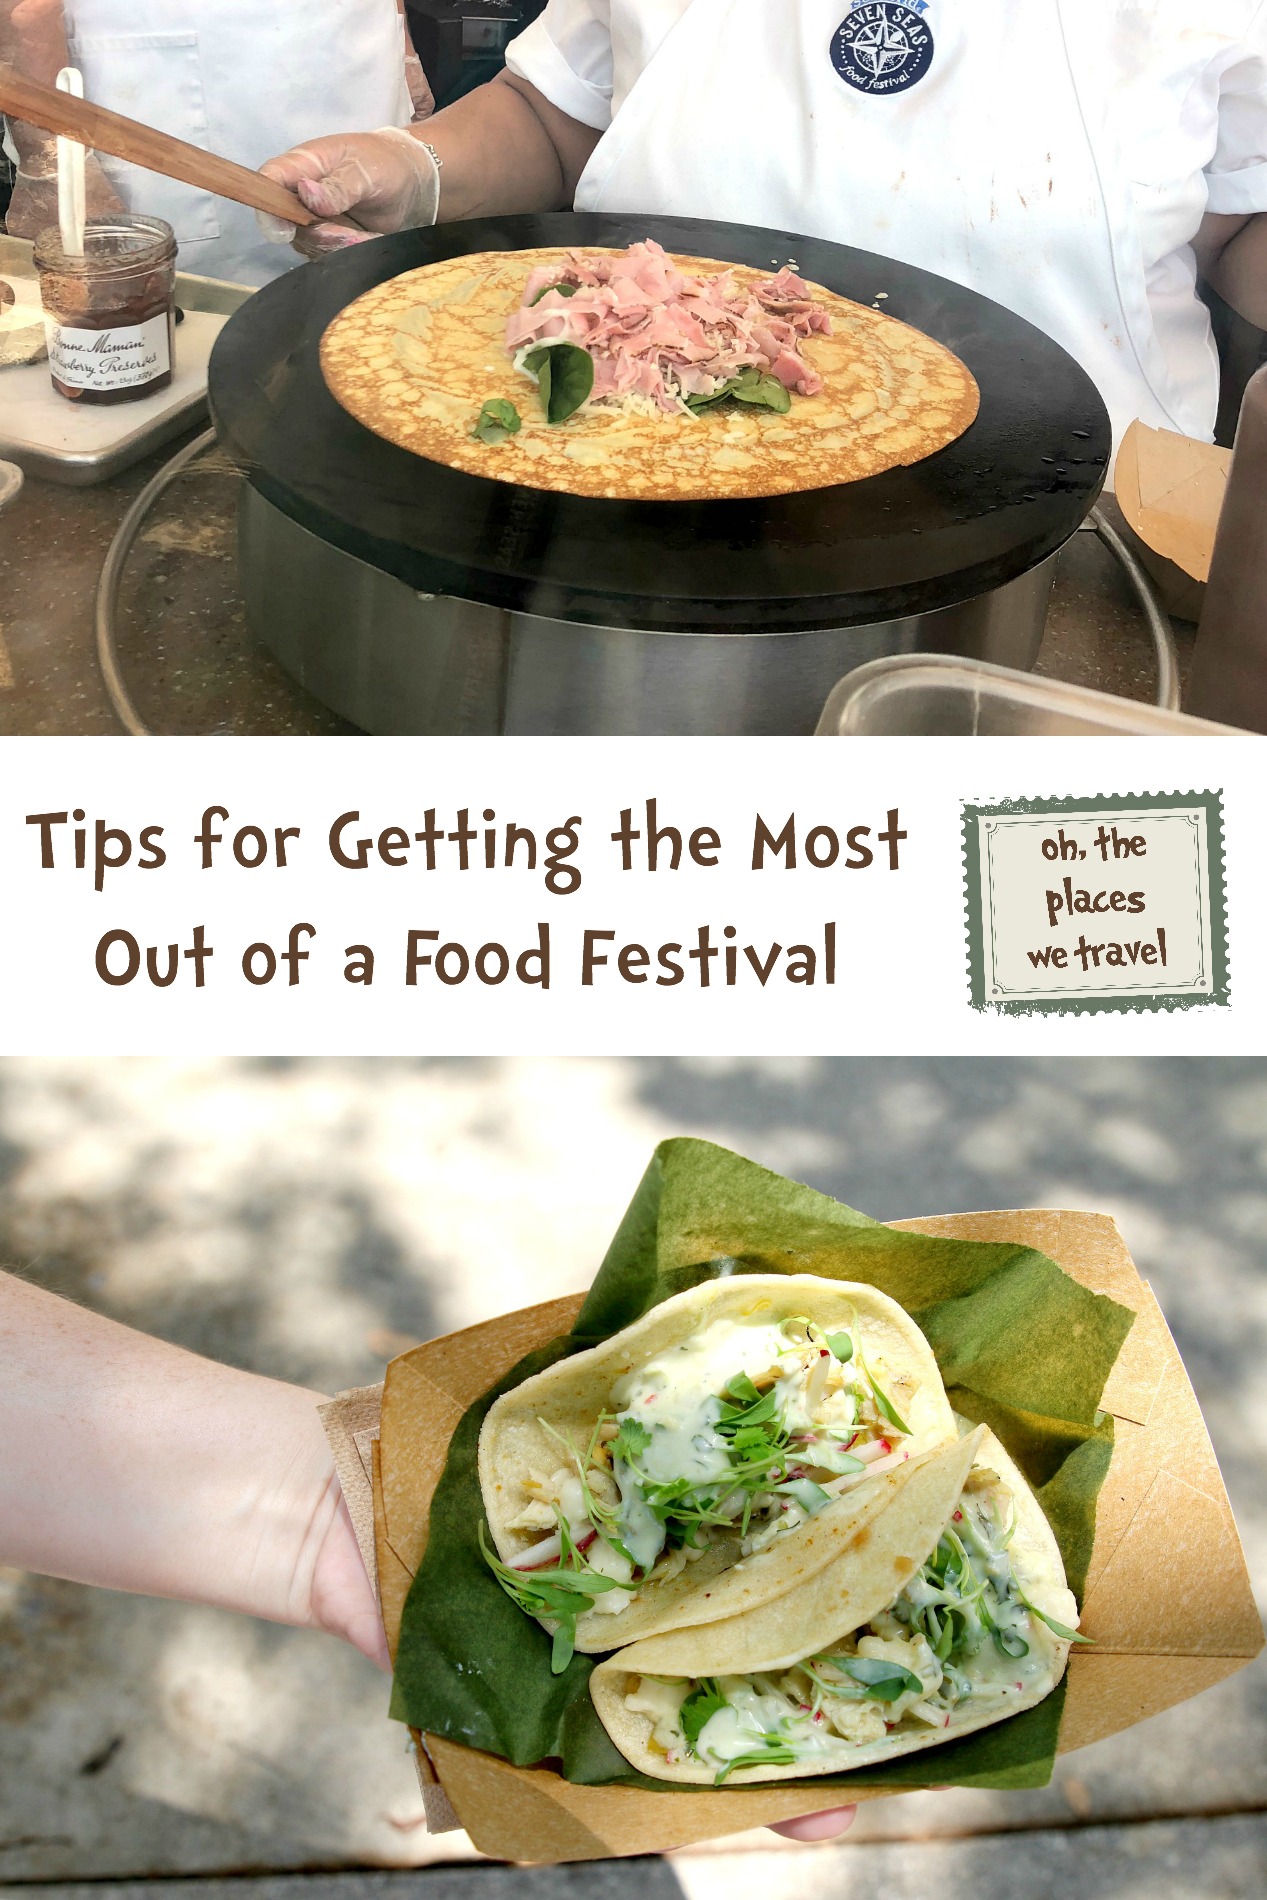 Tips for Getting the Most Out of a Food Festival